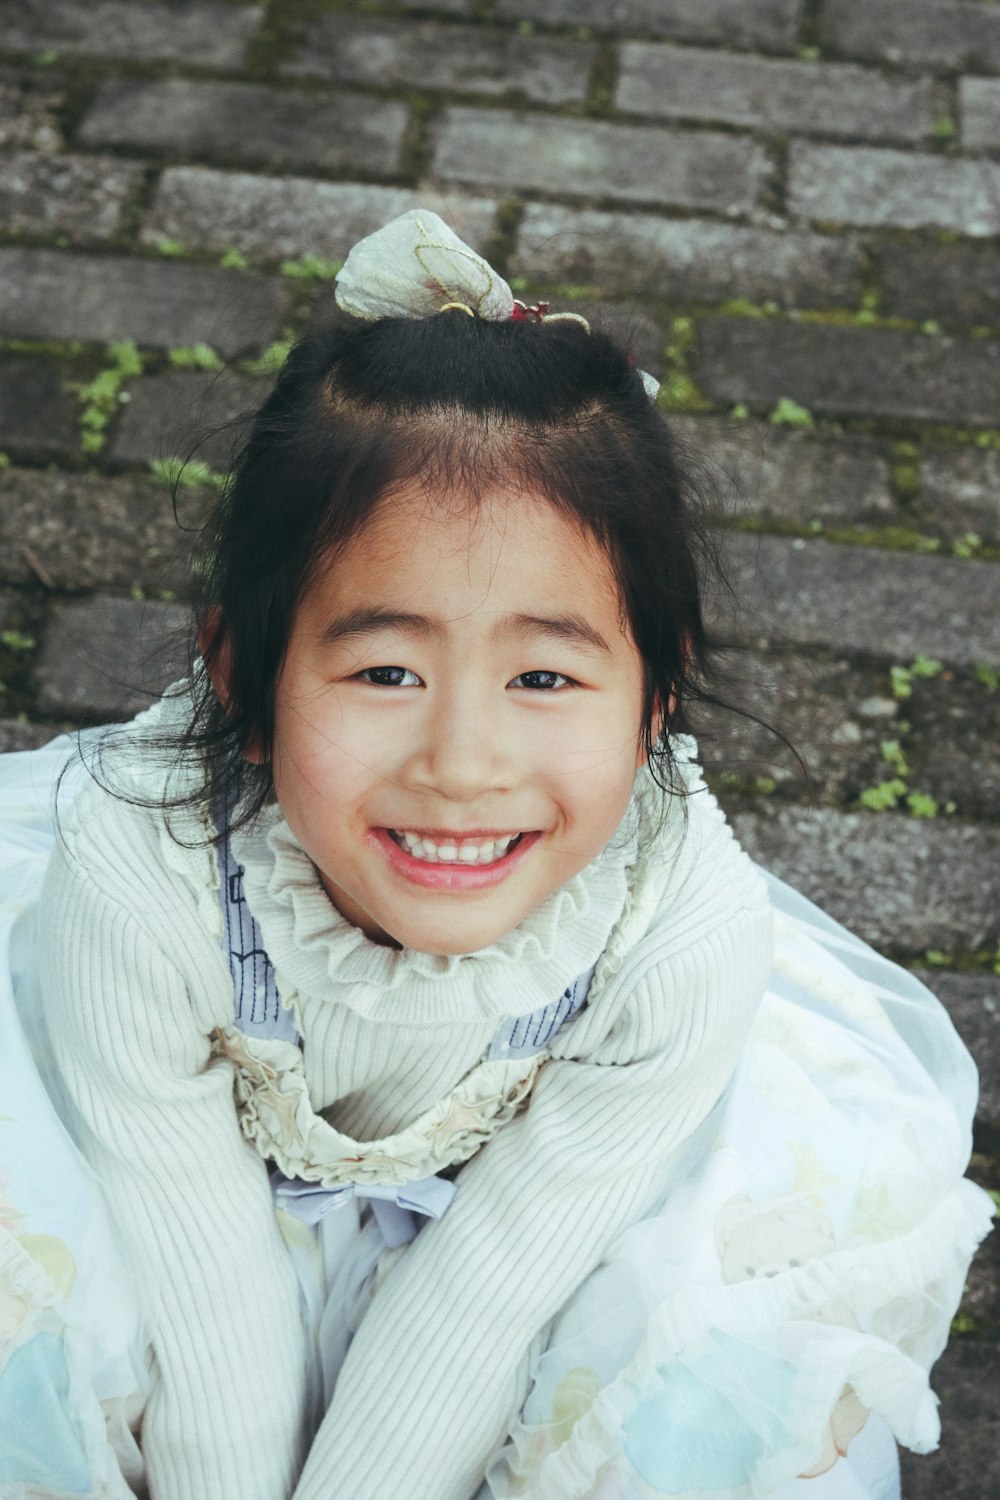 a little girl sitting on the ground smiling